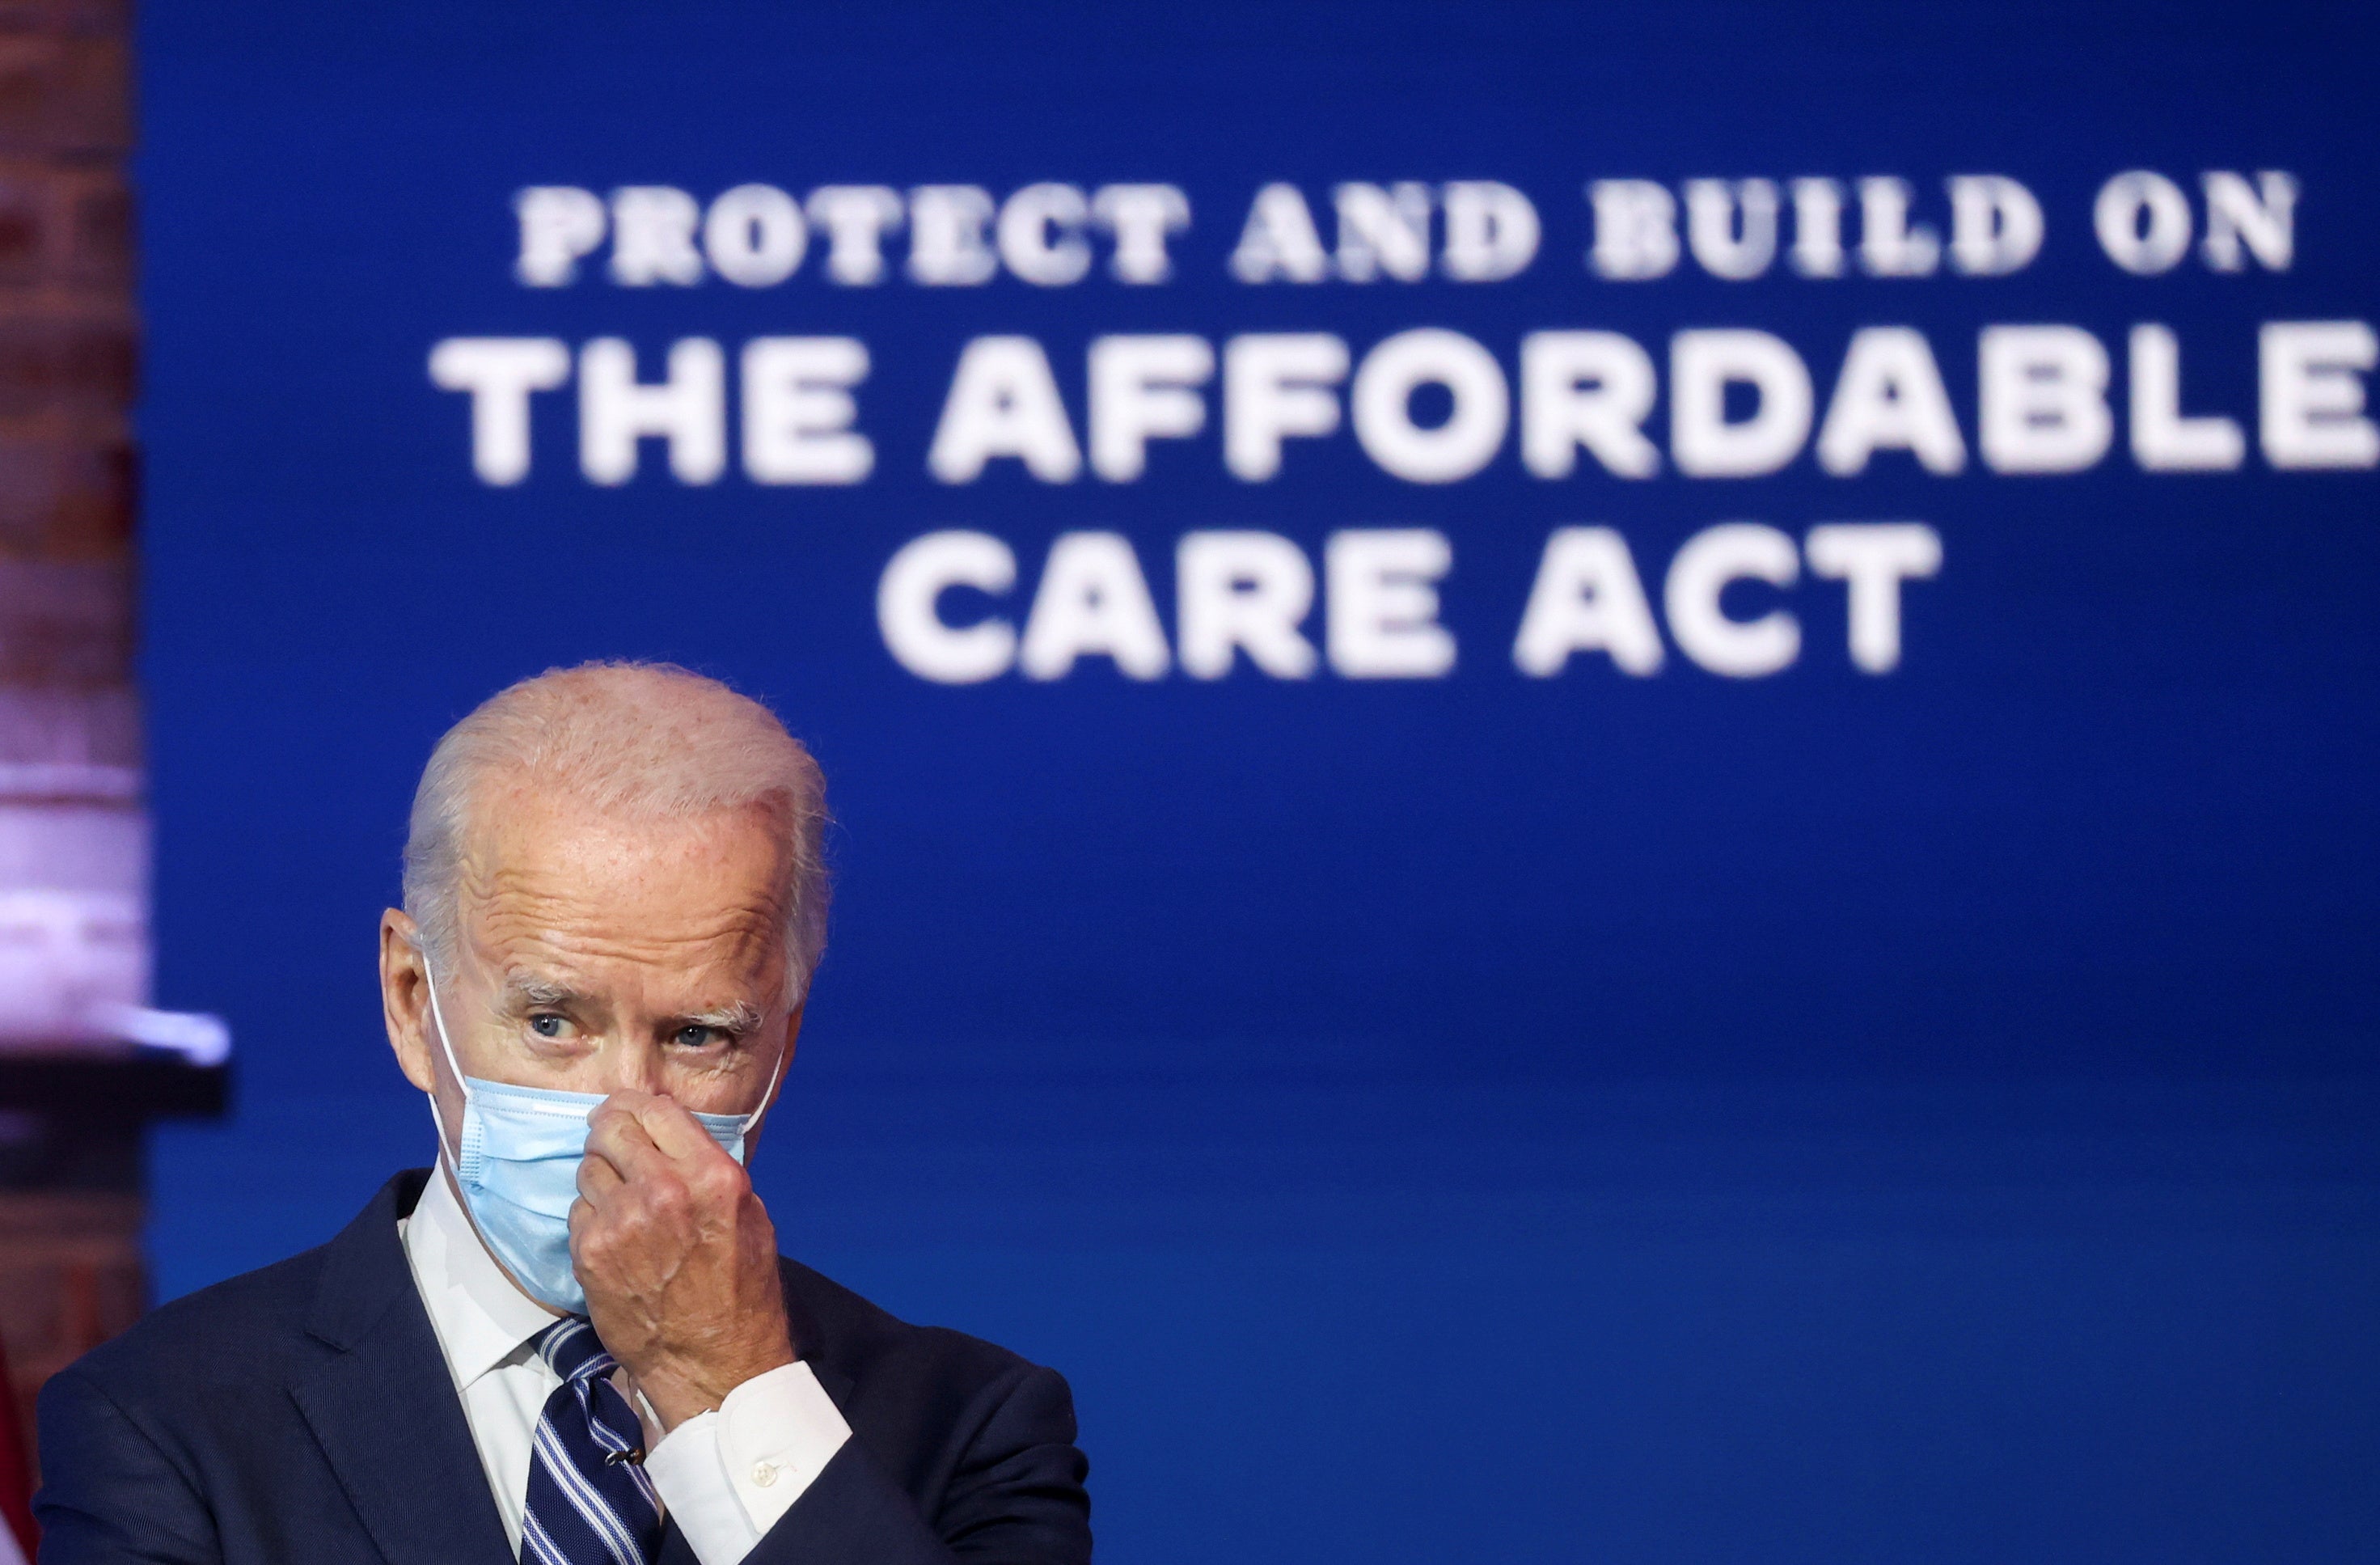 President Joe Biden vowed to expand on the Affordable Care Act during his 2020 run for the White House.